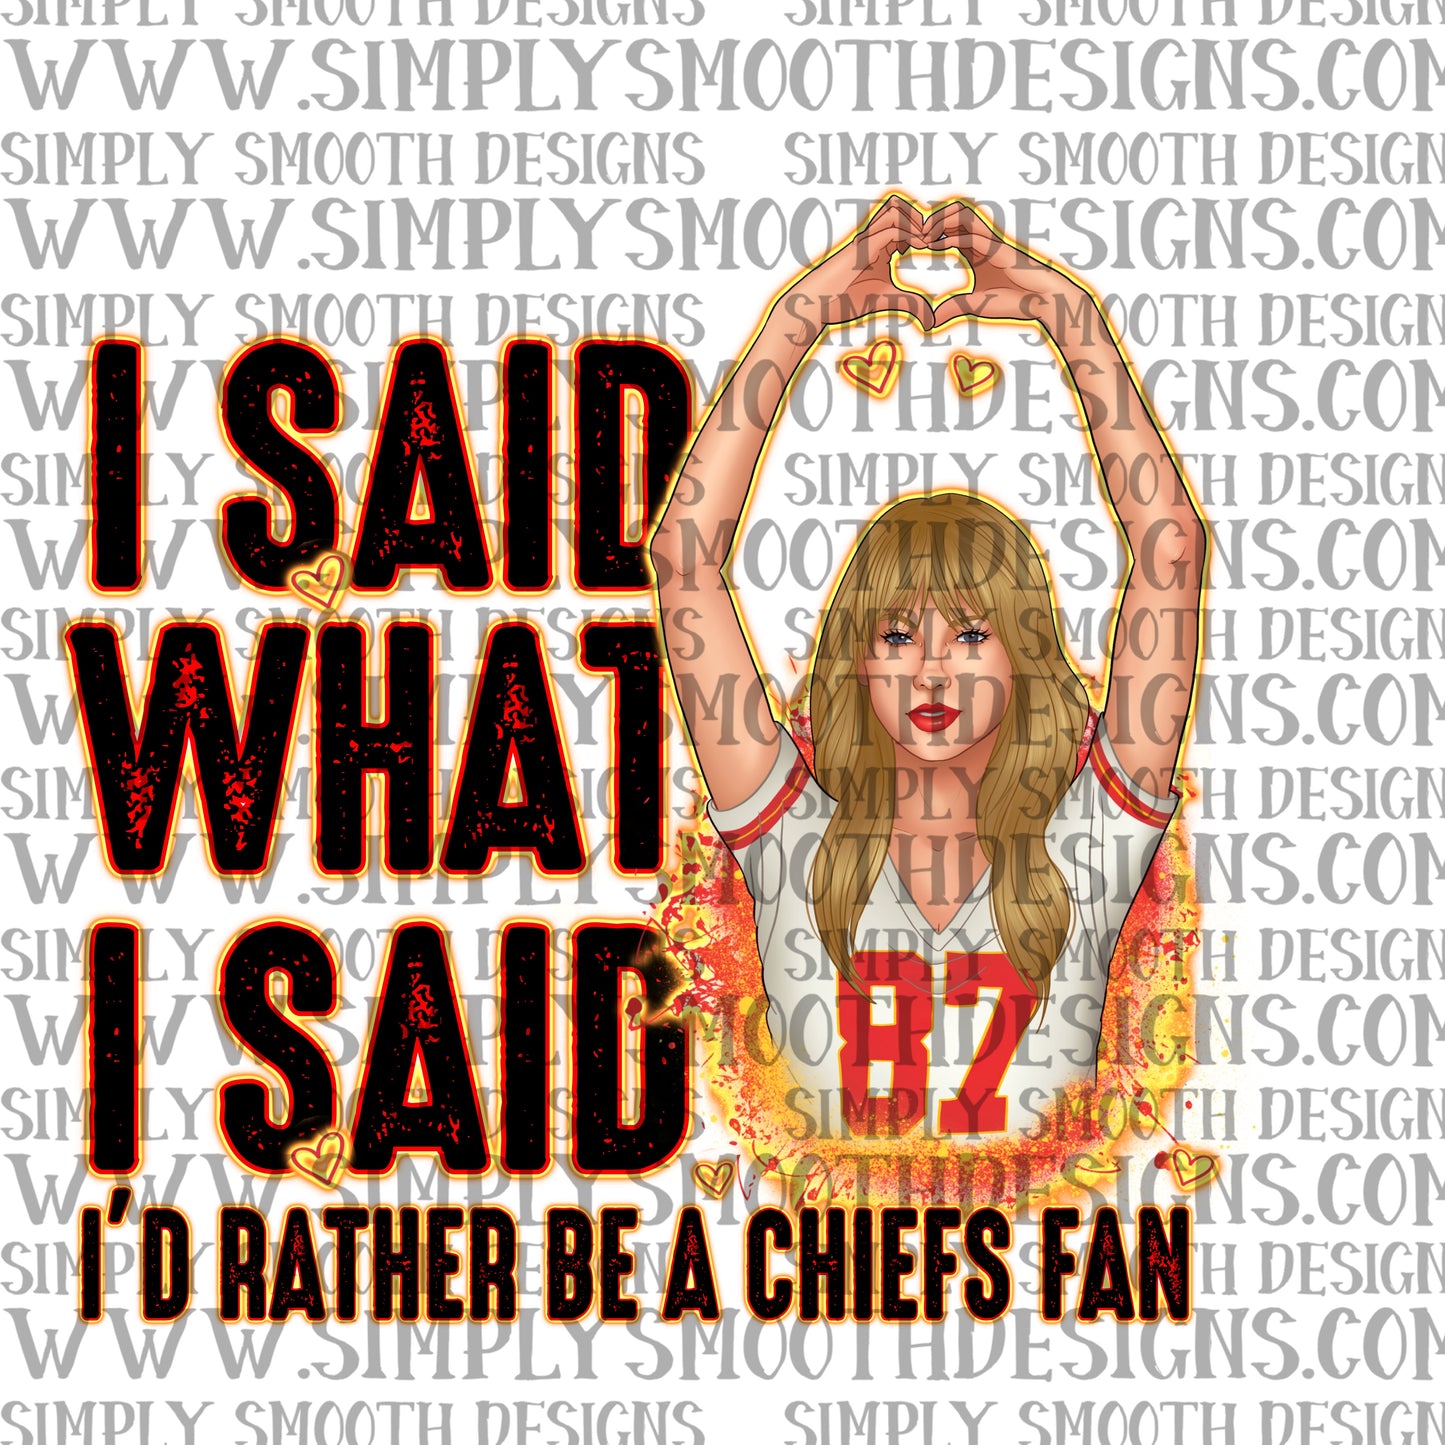 I said what I said I’d rather be a chiefs fan